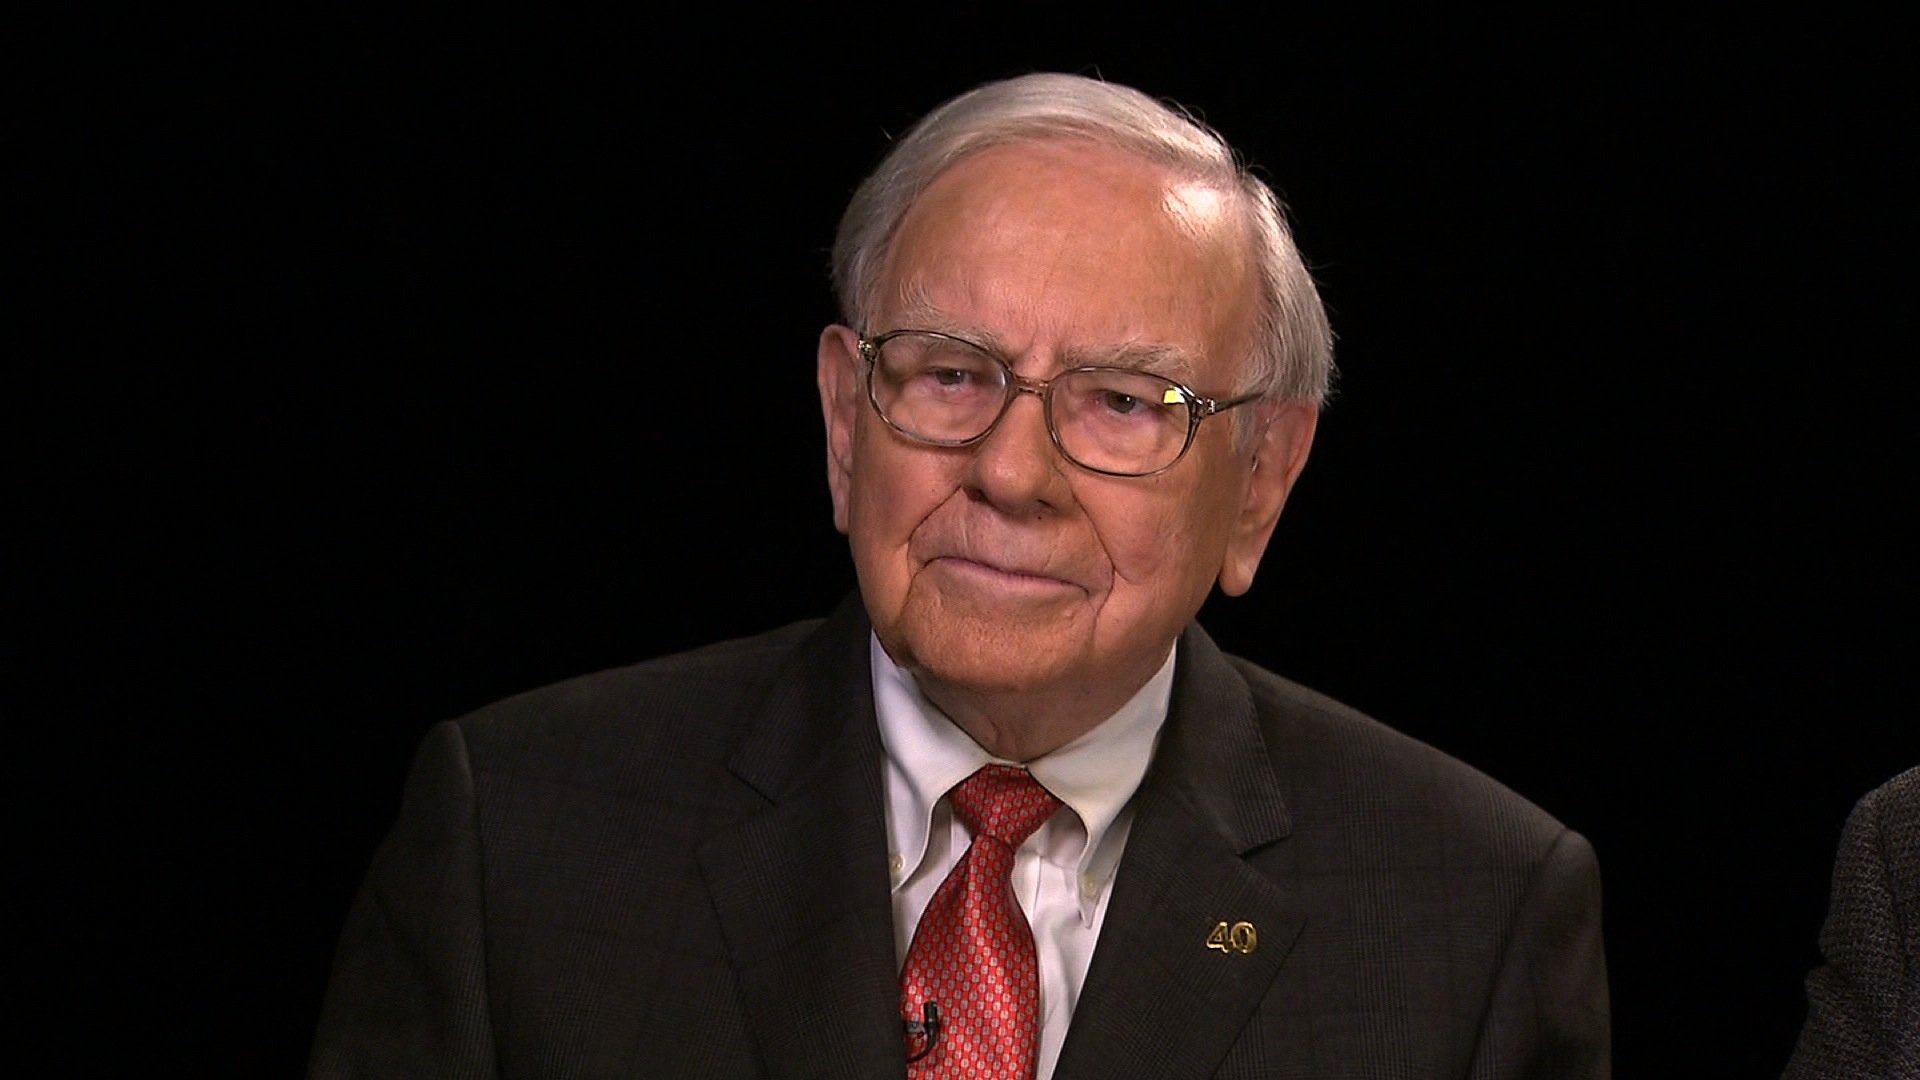 Warren Buffett is one of the richest men in the world. During an interview he offered opinions on Obamacare and the government shutdown.